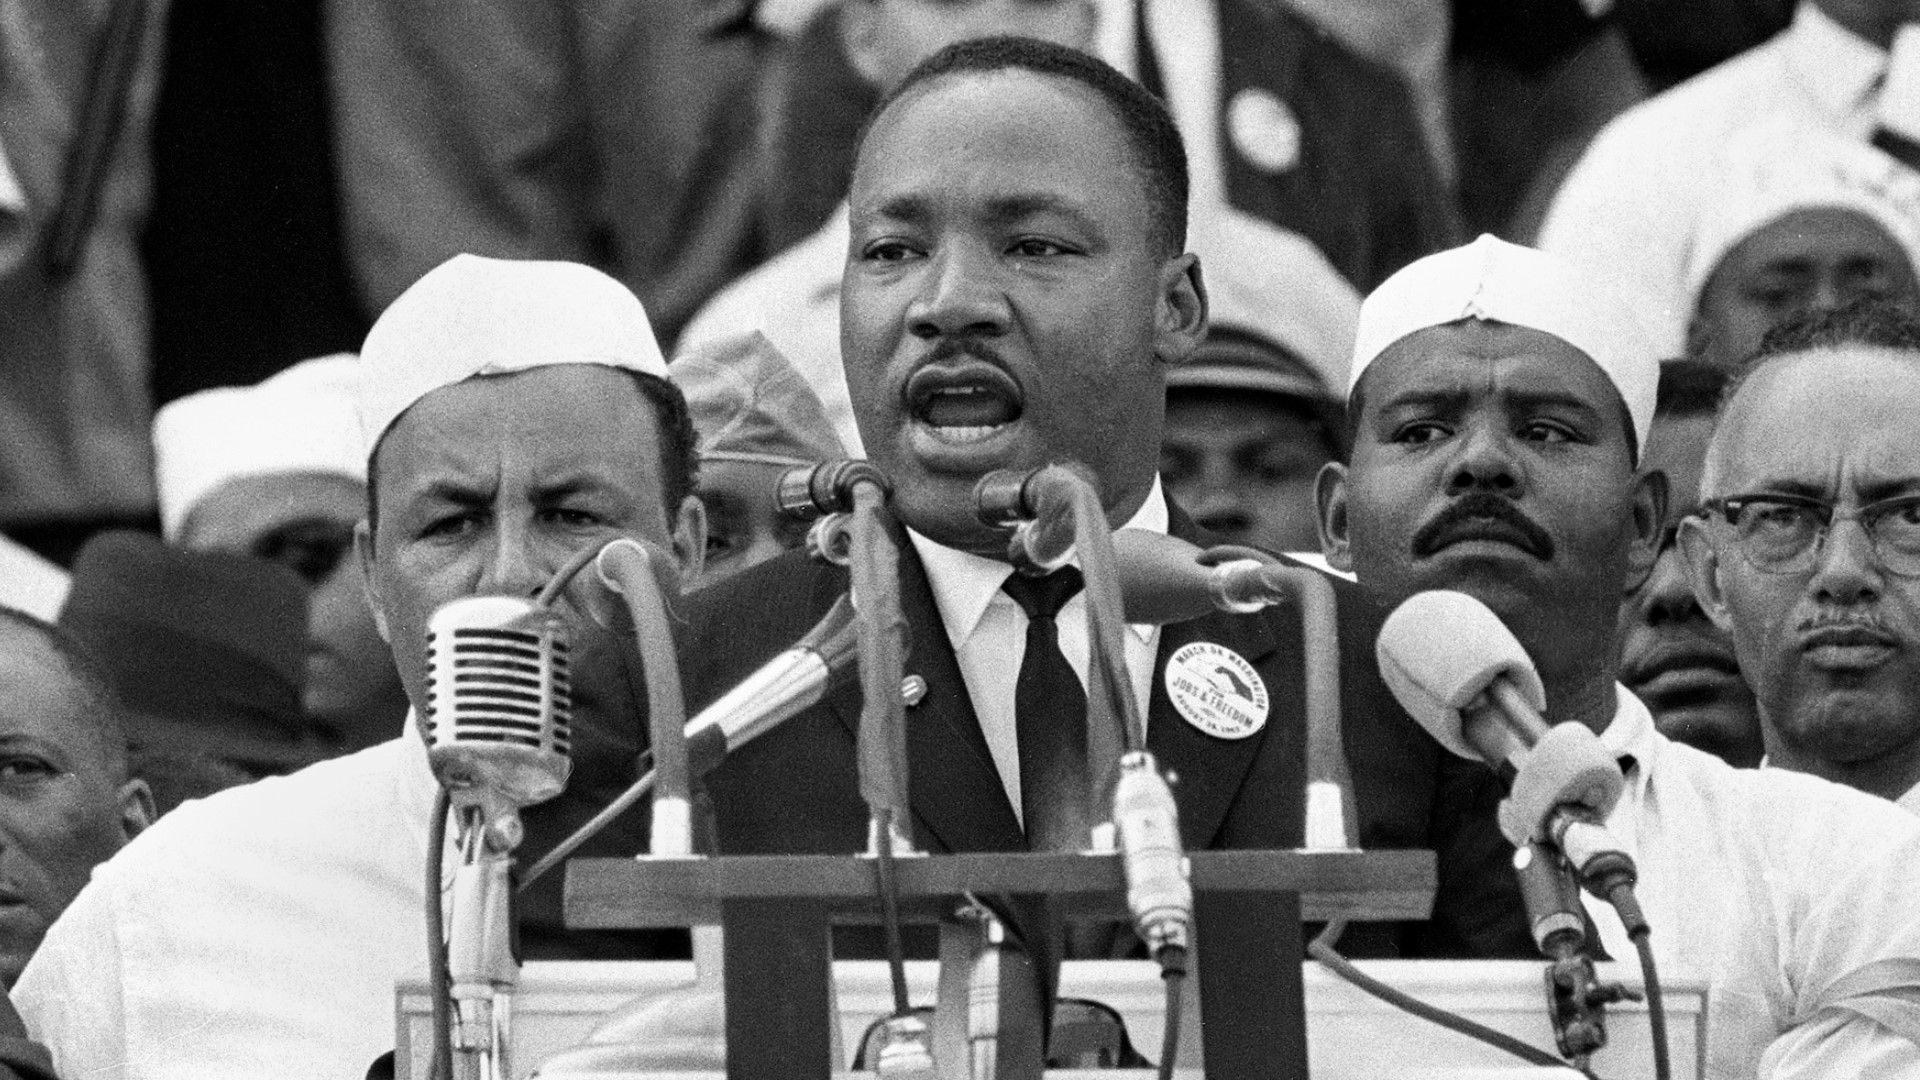 As numerous people celebrate the legacy of Dr. Martin Luther King, ABC10's Kandace Redd explains why, historically, that wasn't always the case.